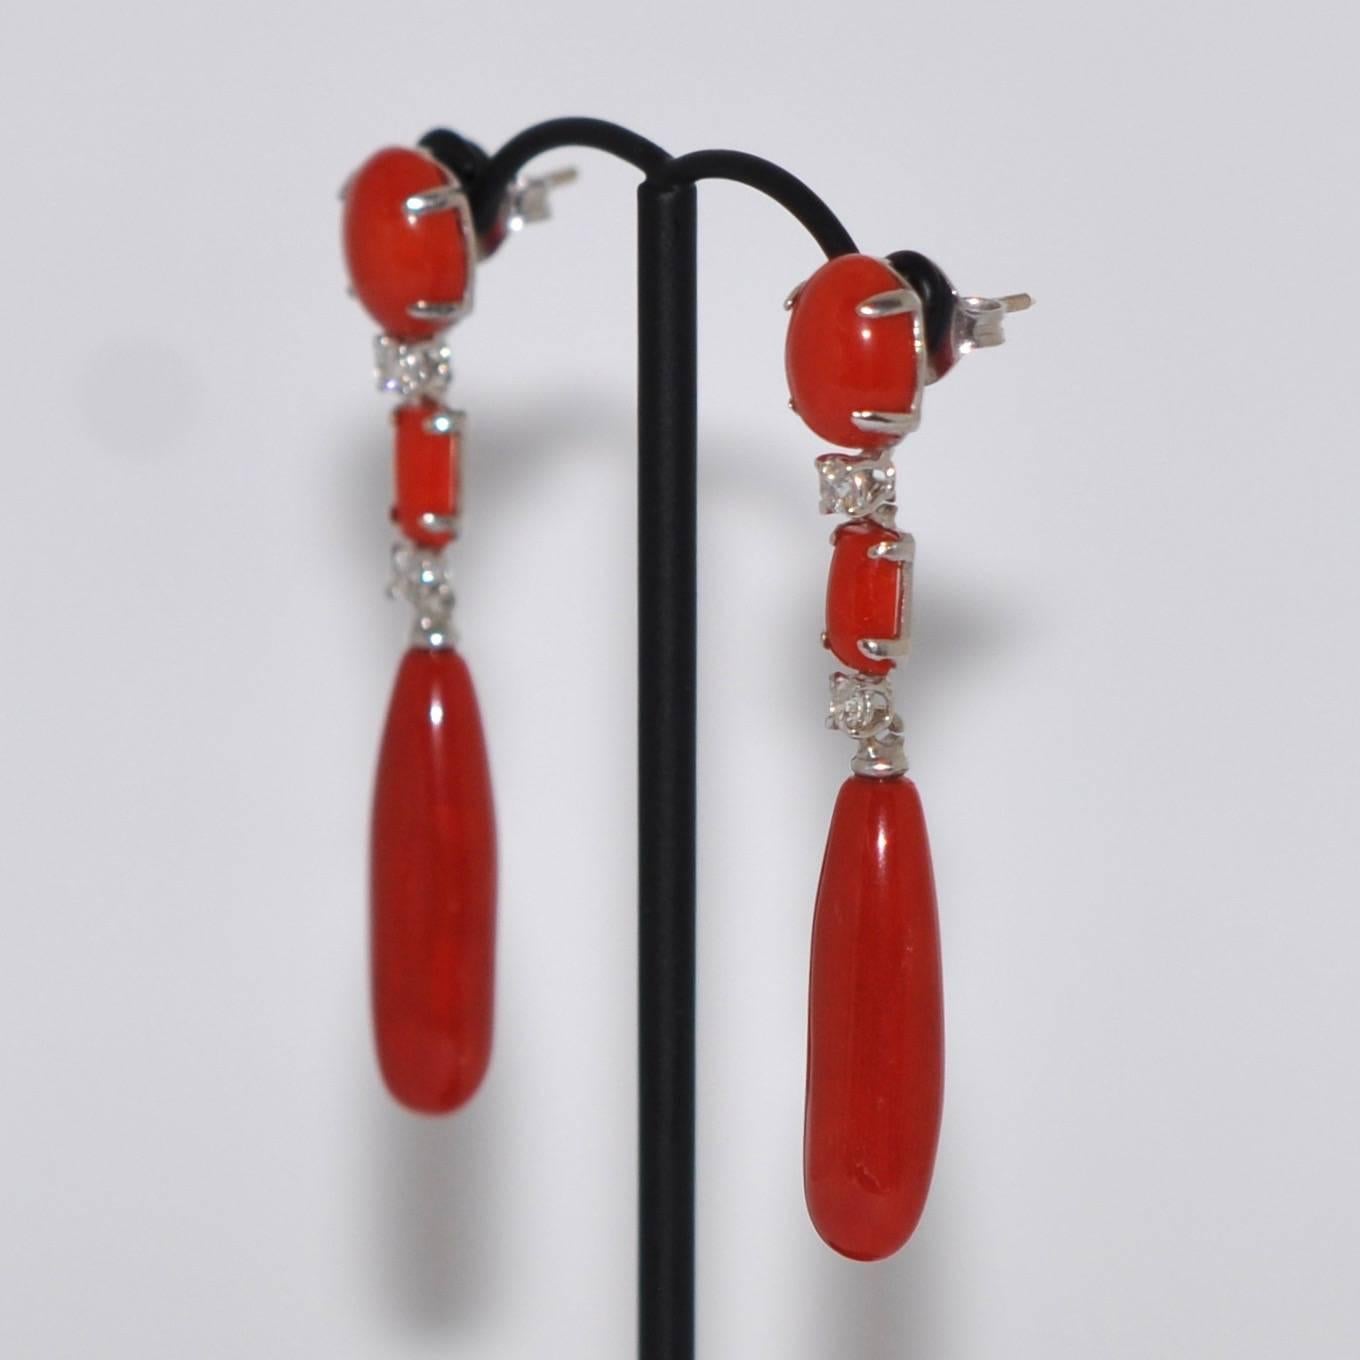 Discover this Coral and White Diamonds ct 0,28 on White Gold 18K Chandelier Earrings.
Red Coral
2 White Diamonds ct 0.28 
White Gold 18K 
